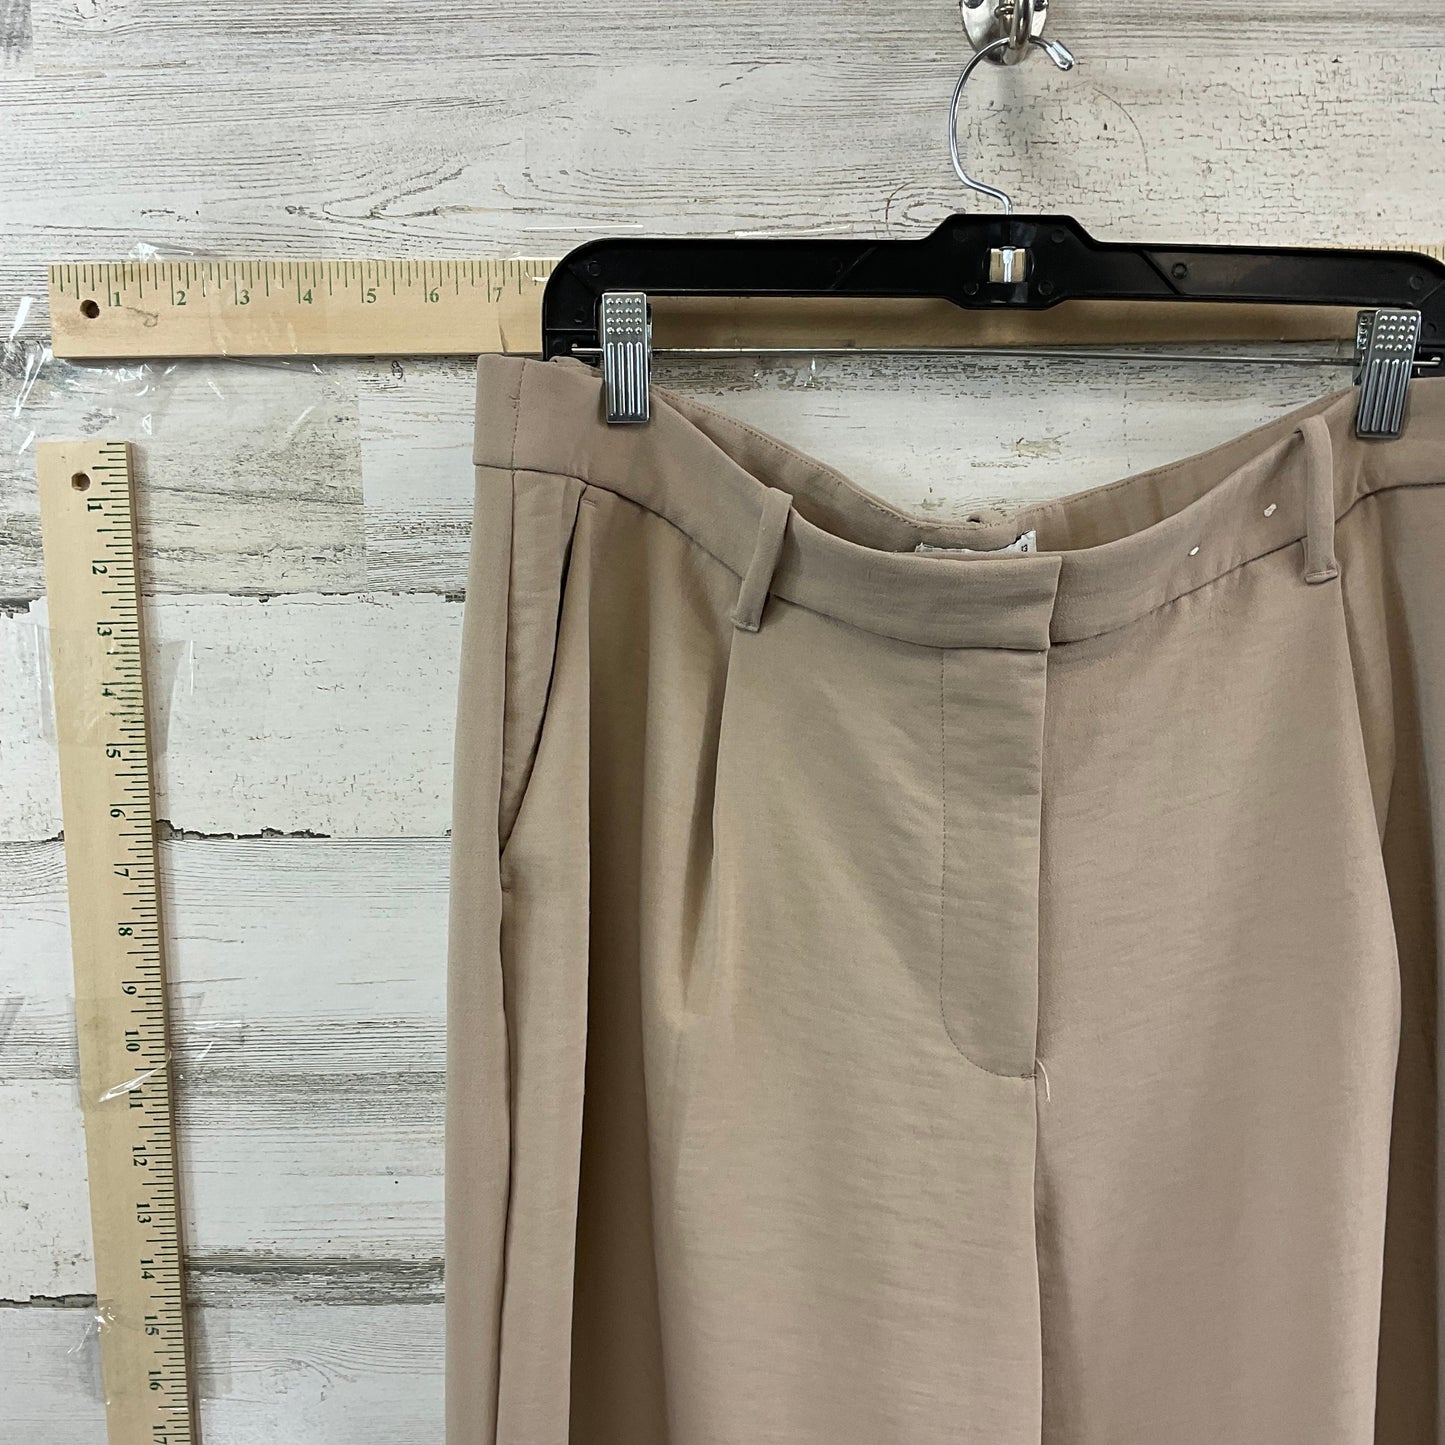 Beige Pants Dress Abercrombie And Fitch, Size 16